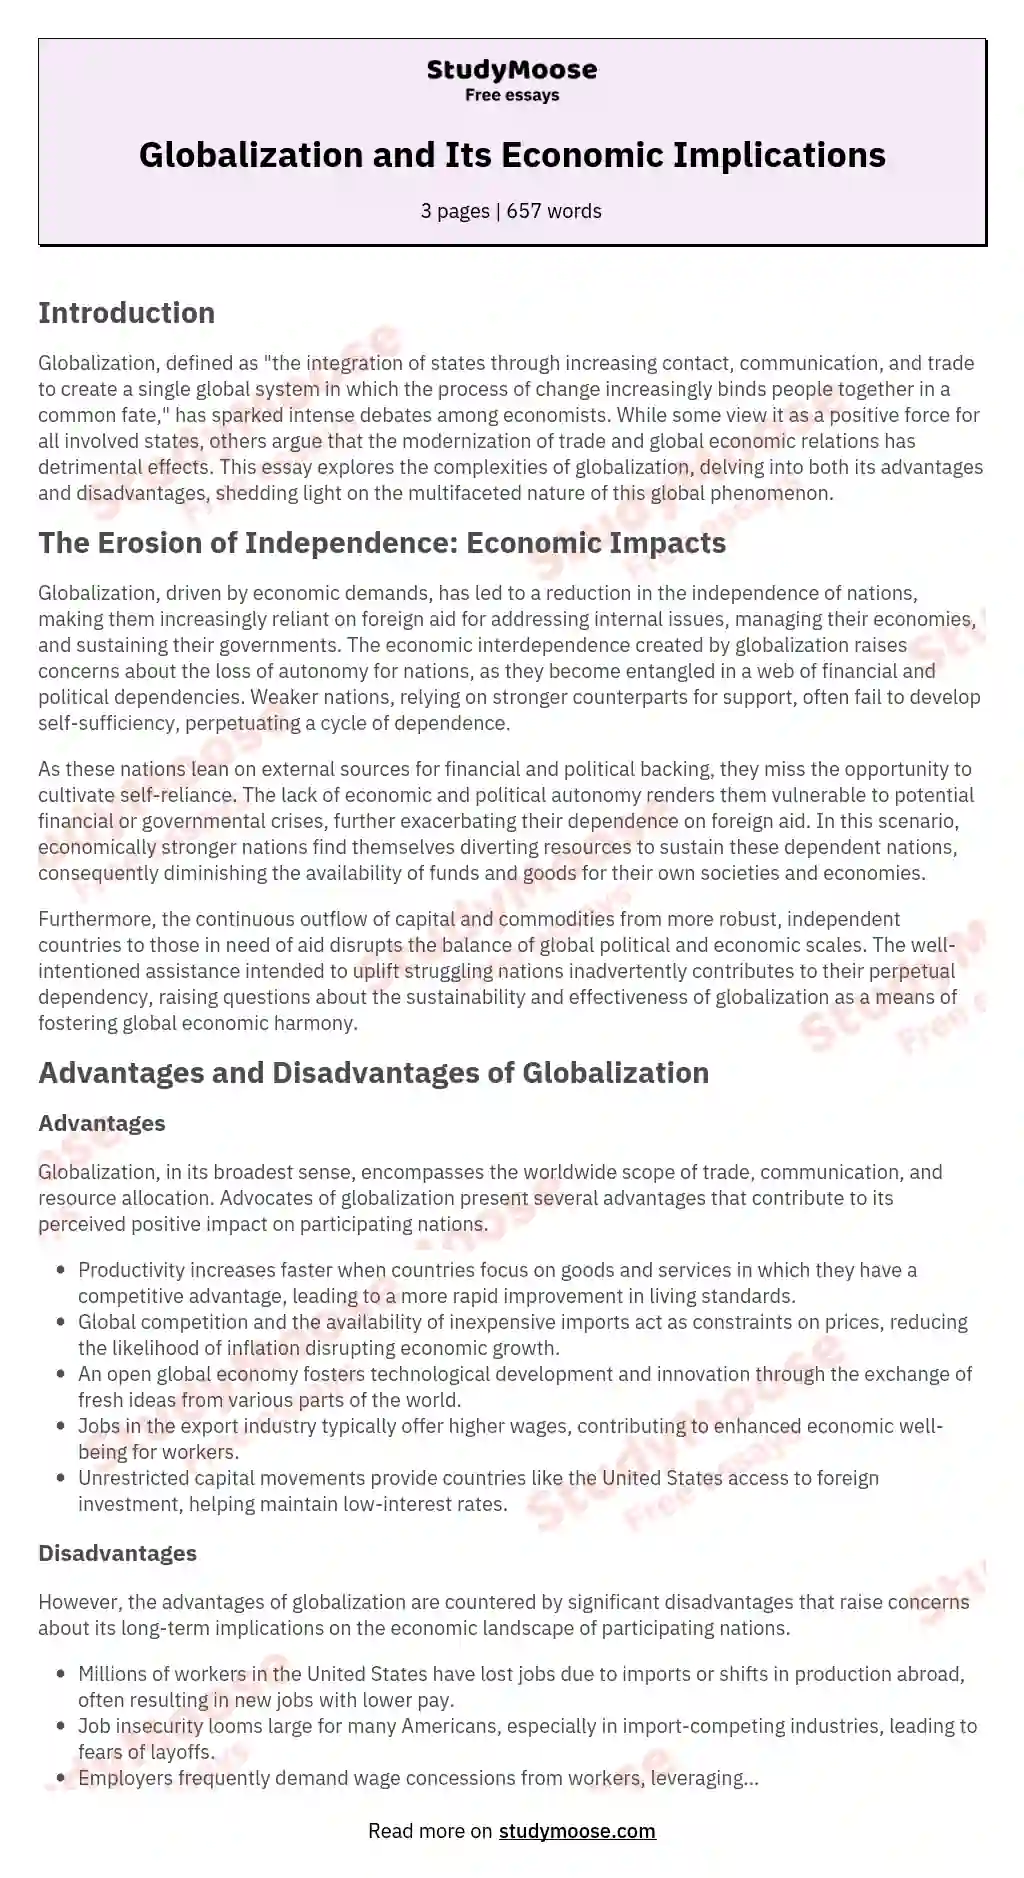 Globalization and Its Economic Implications essay